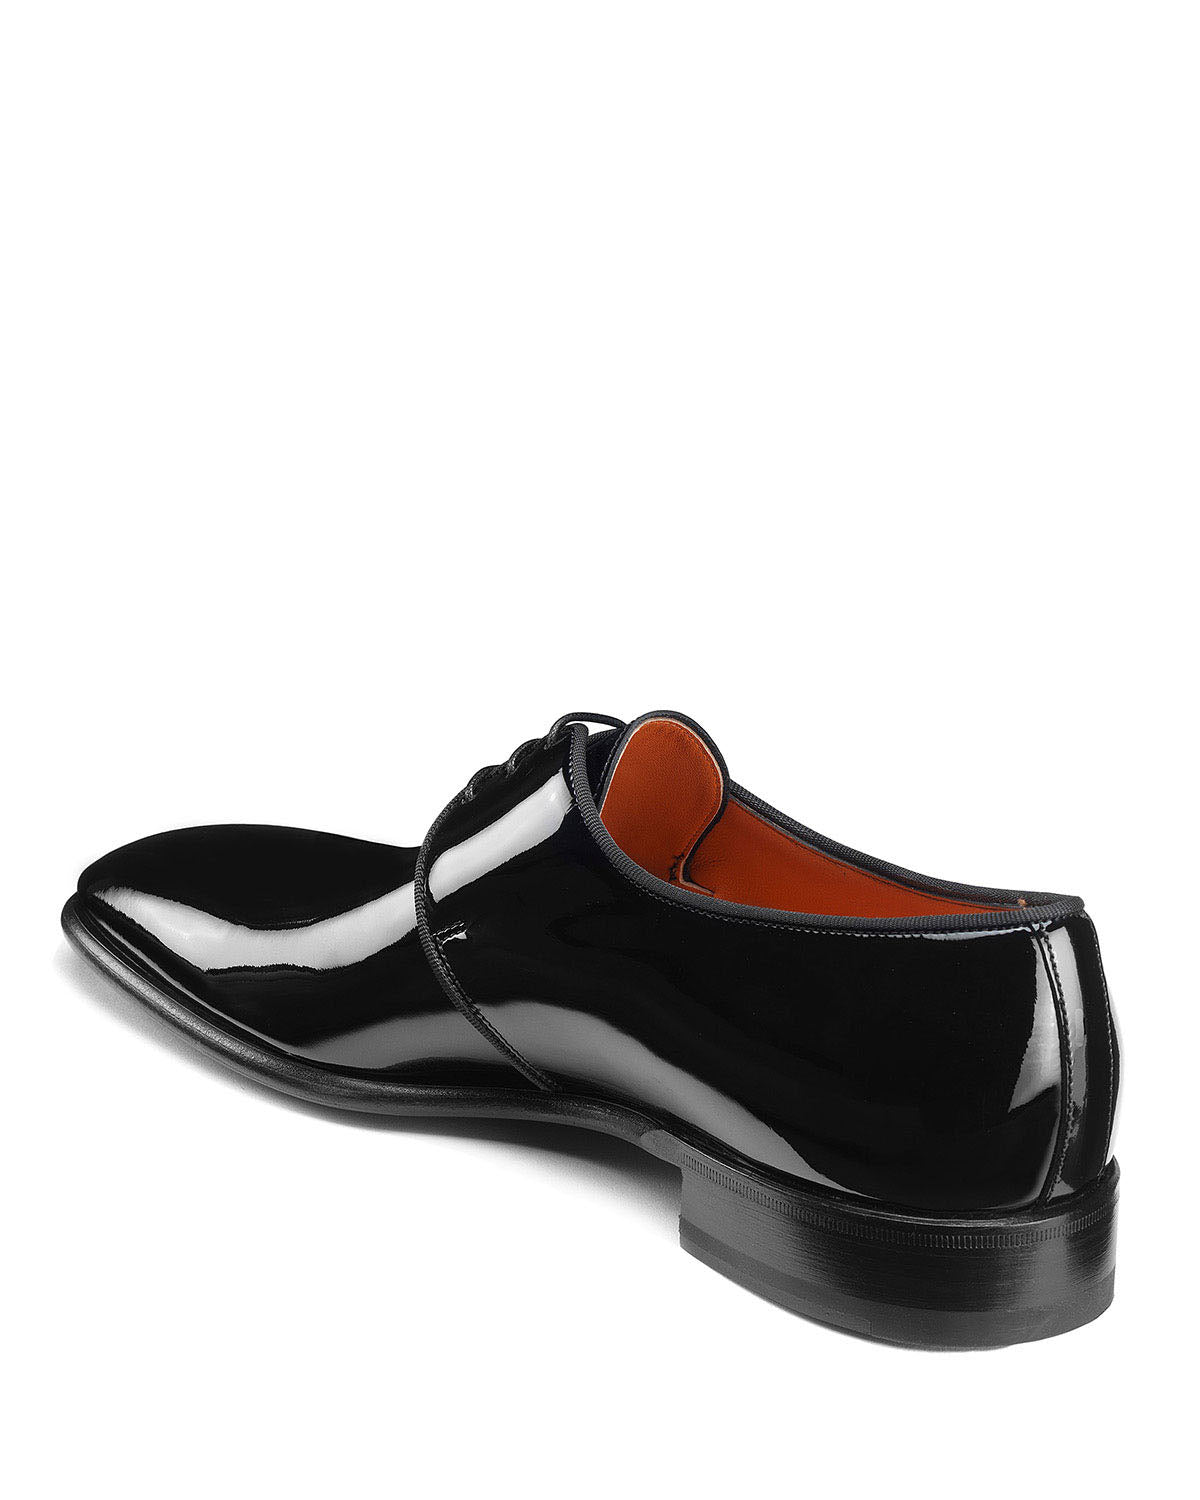 Black Patent Leather Formal Derby Lace Up Shoes for Men with Leather Sole. Goodyear Welted Construction Available.